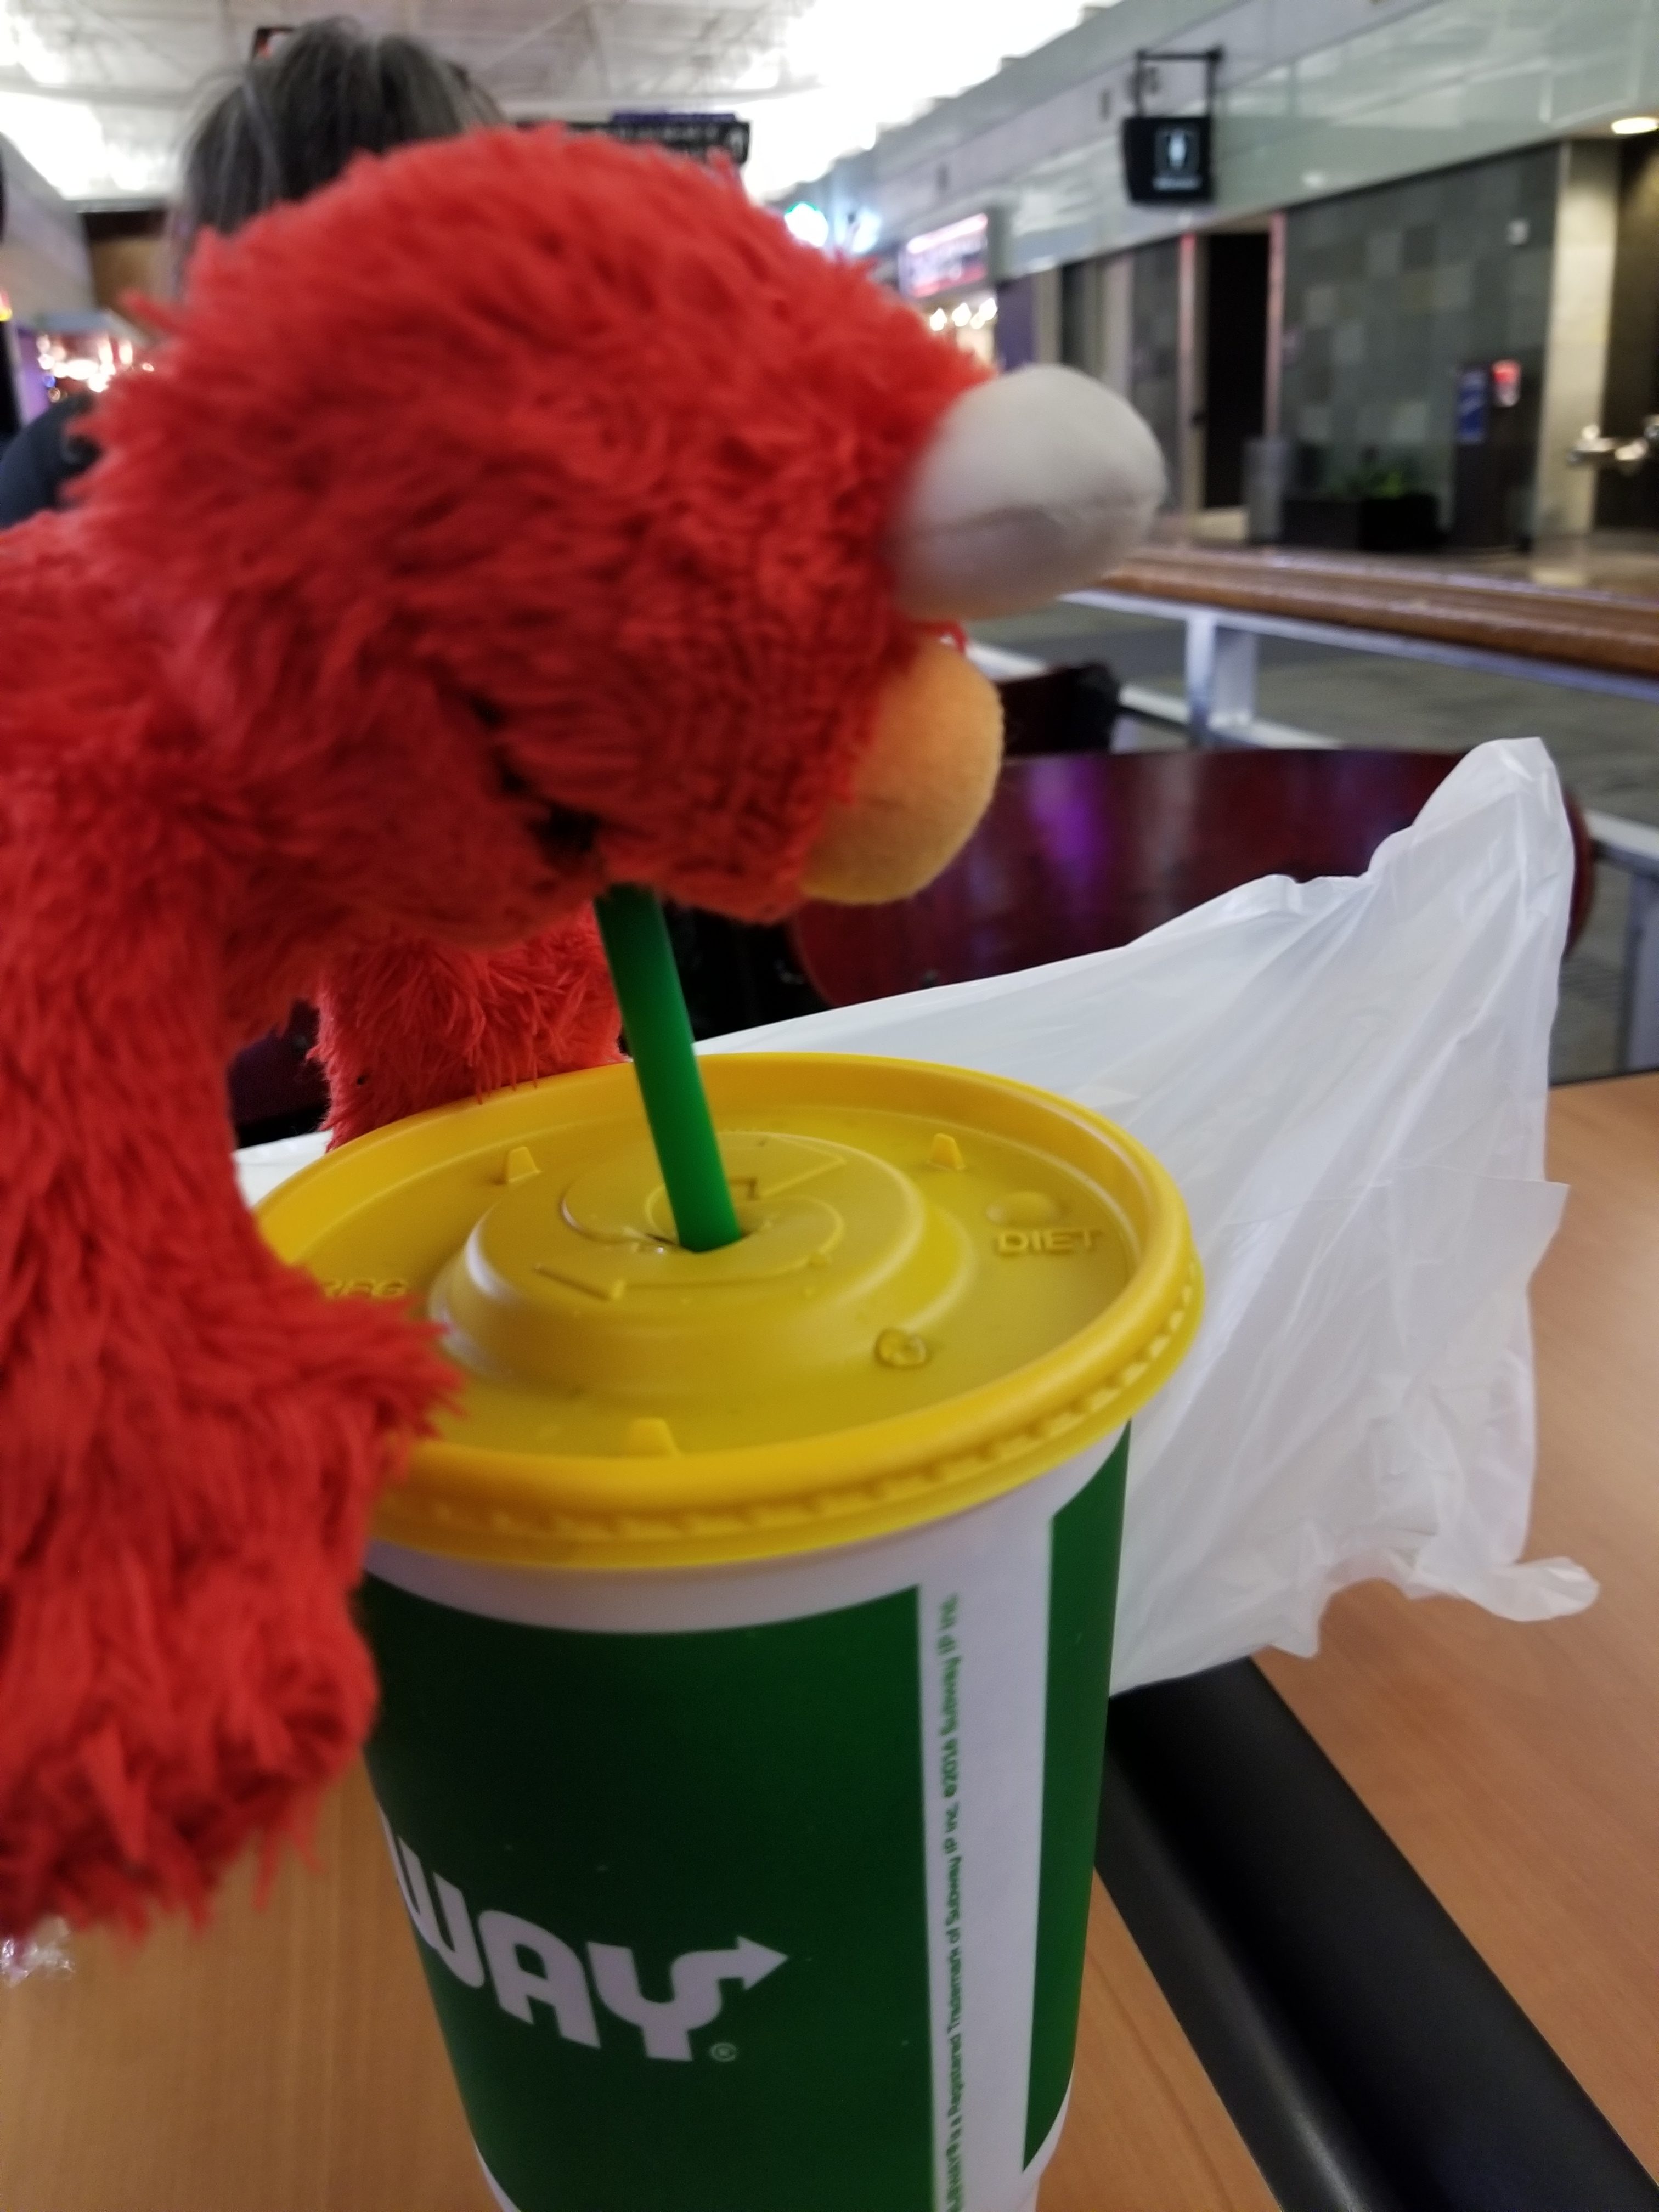 That's better, use the straw!